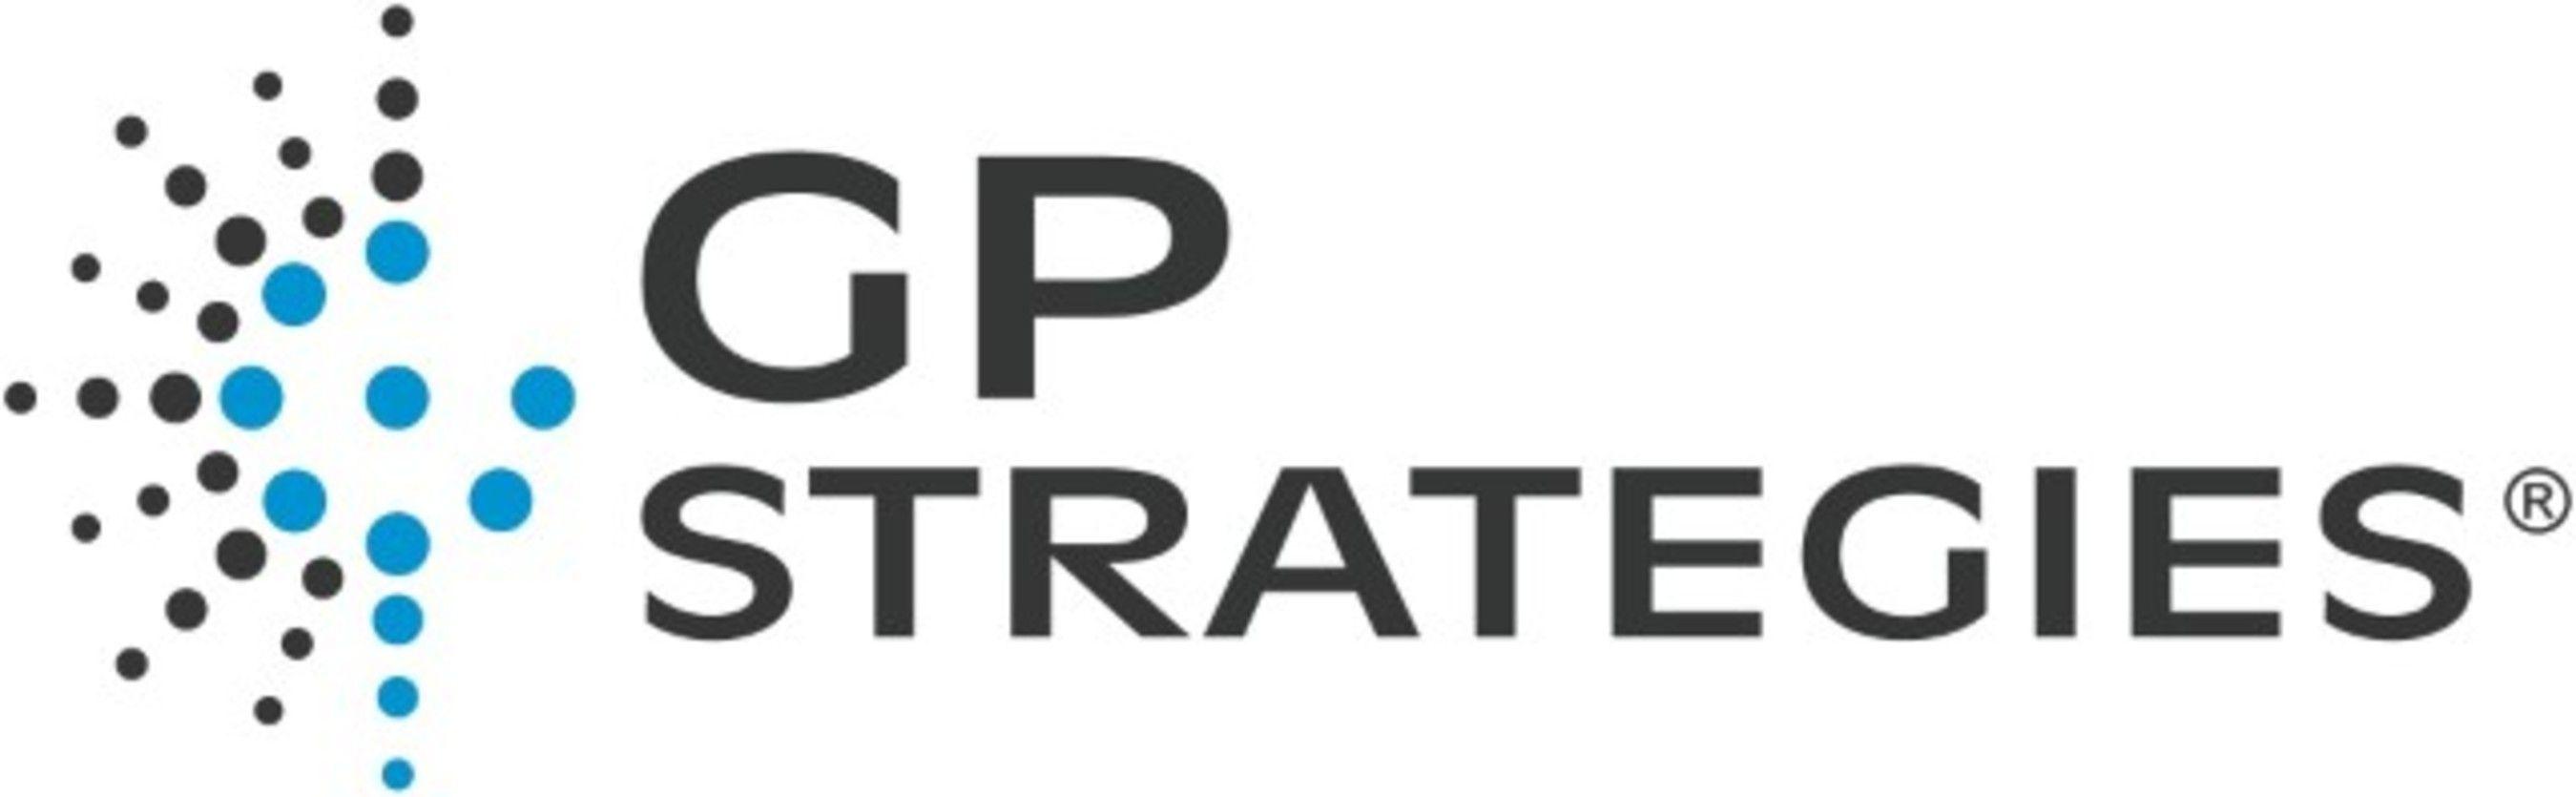 KNPC Logo - GP Strategies Awarded Five-Year Contract with Kuwait National ...